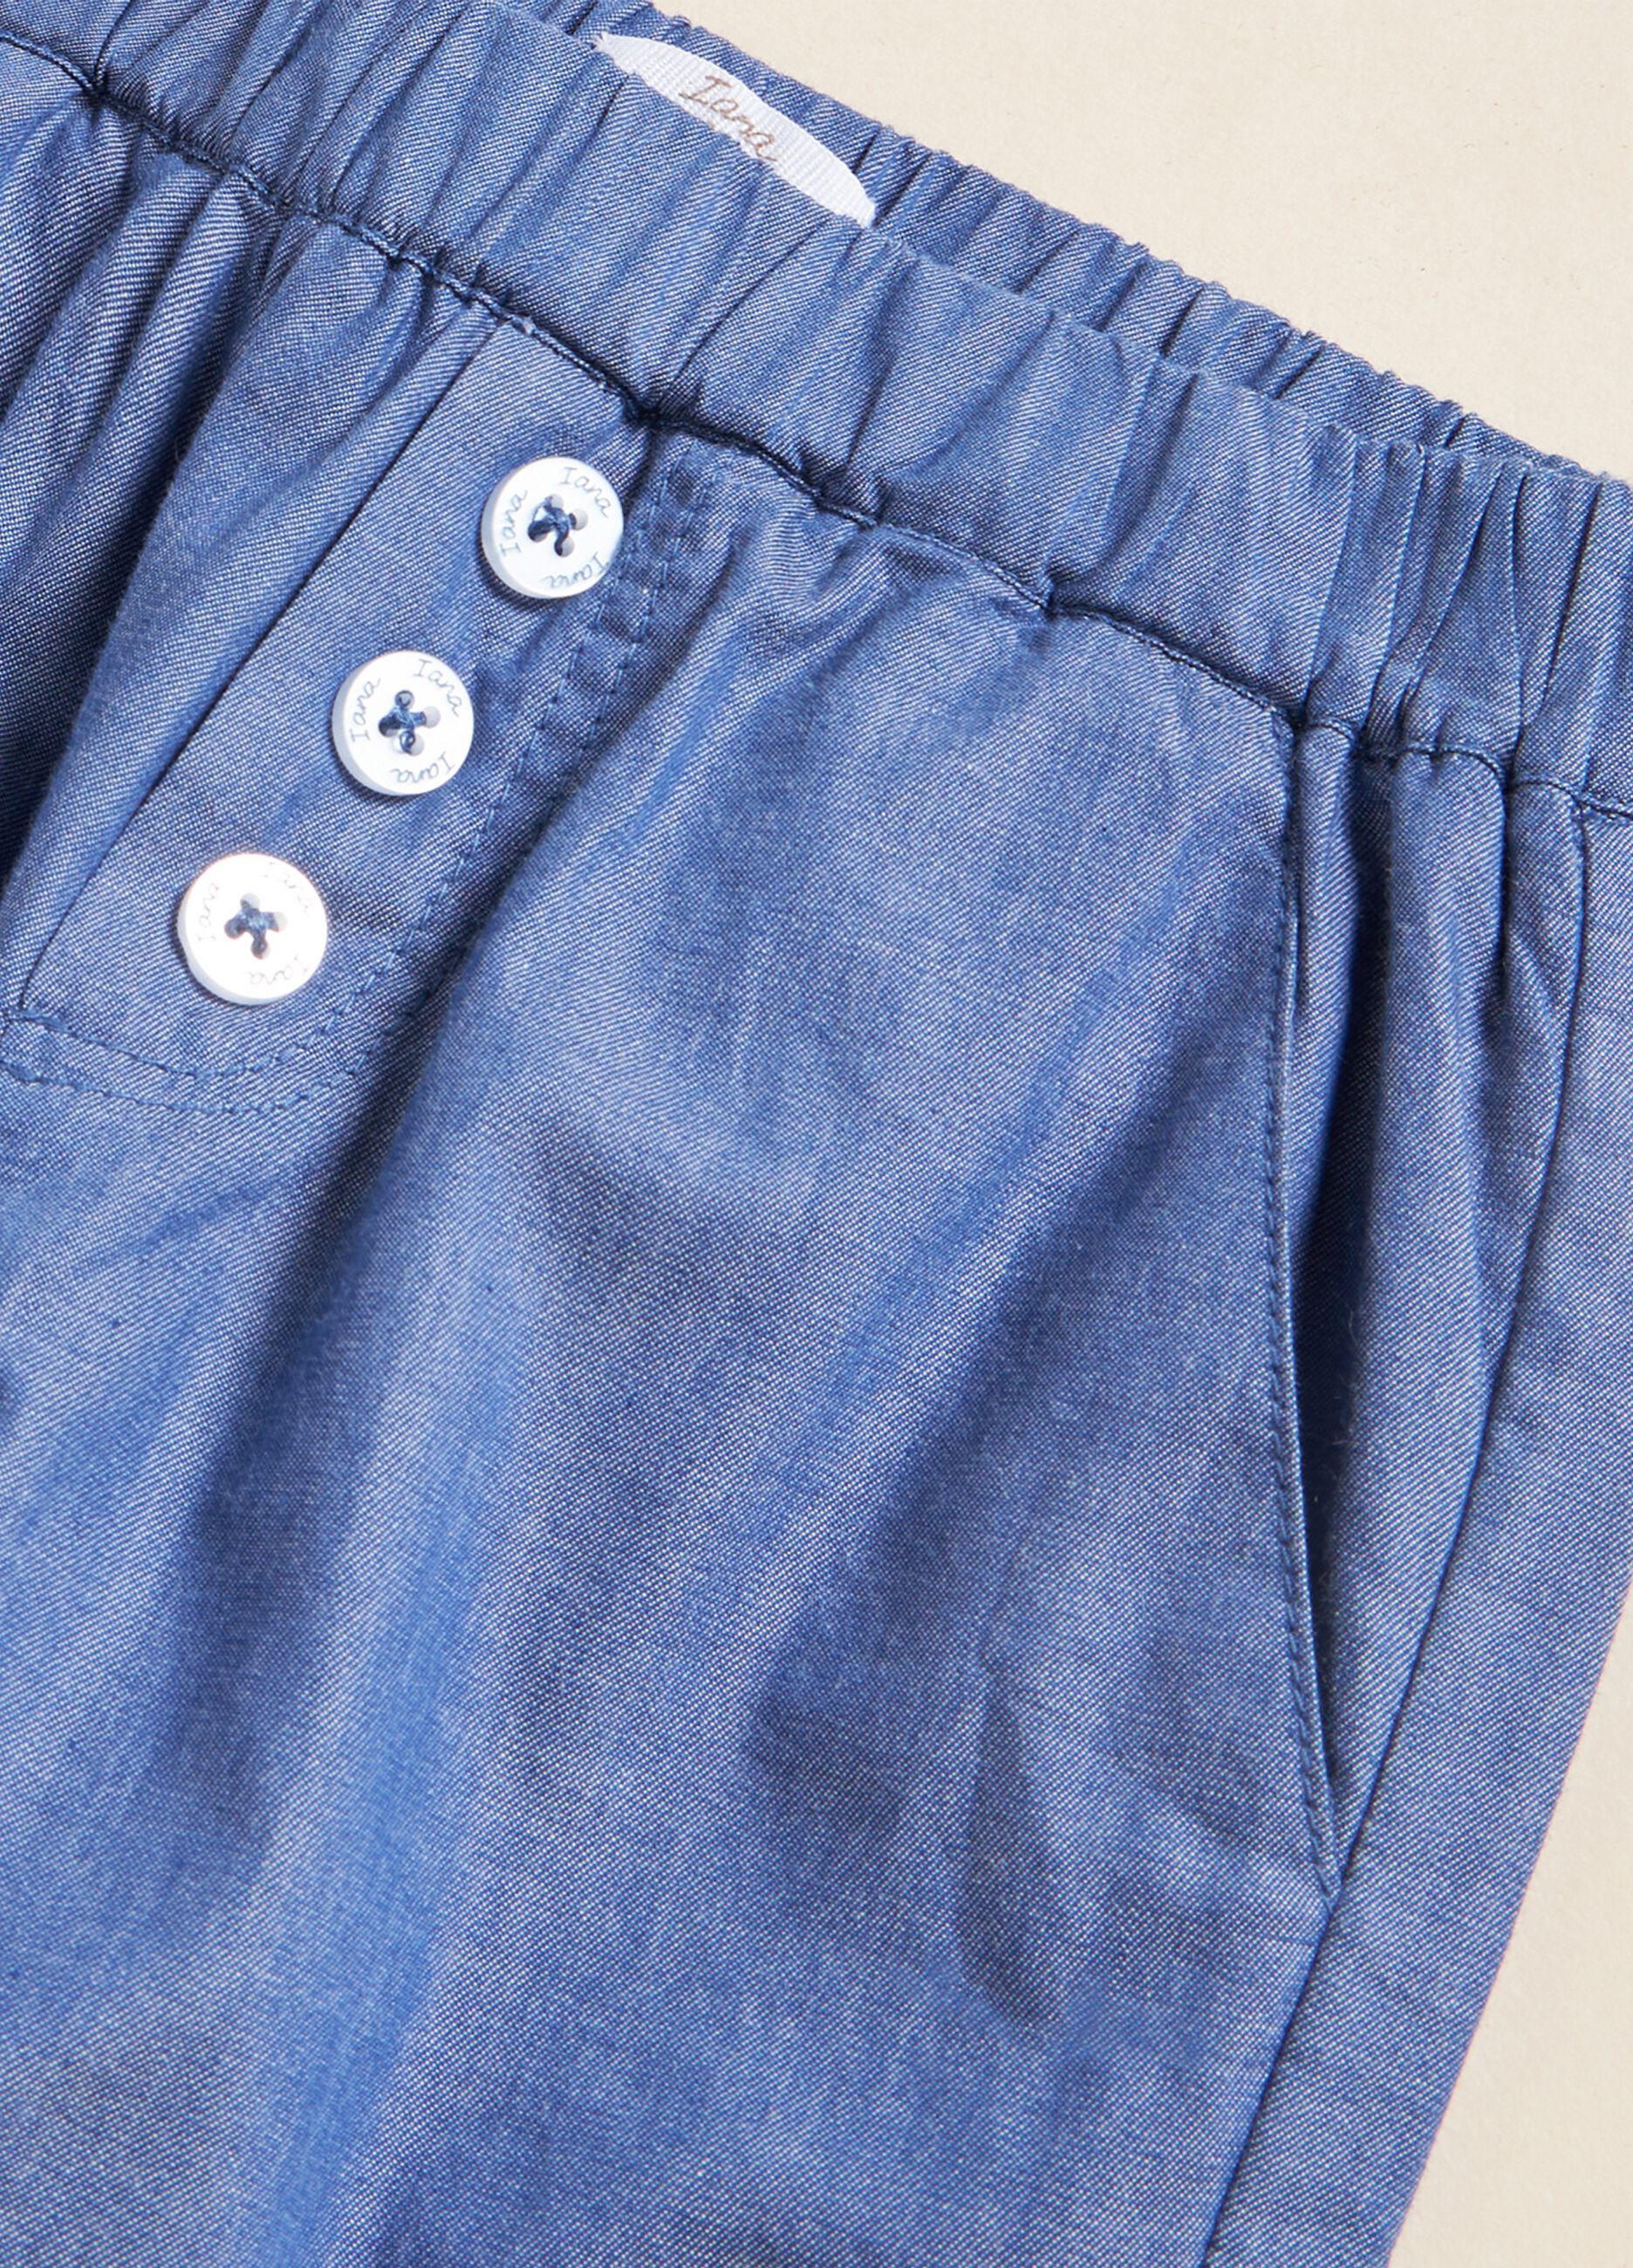 IANA trousers in 100% chambray cotton